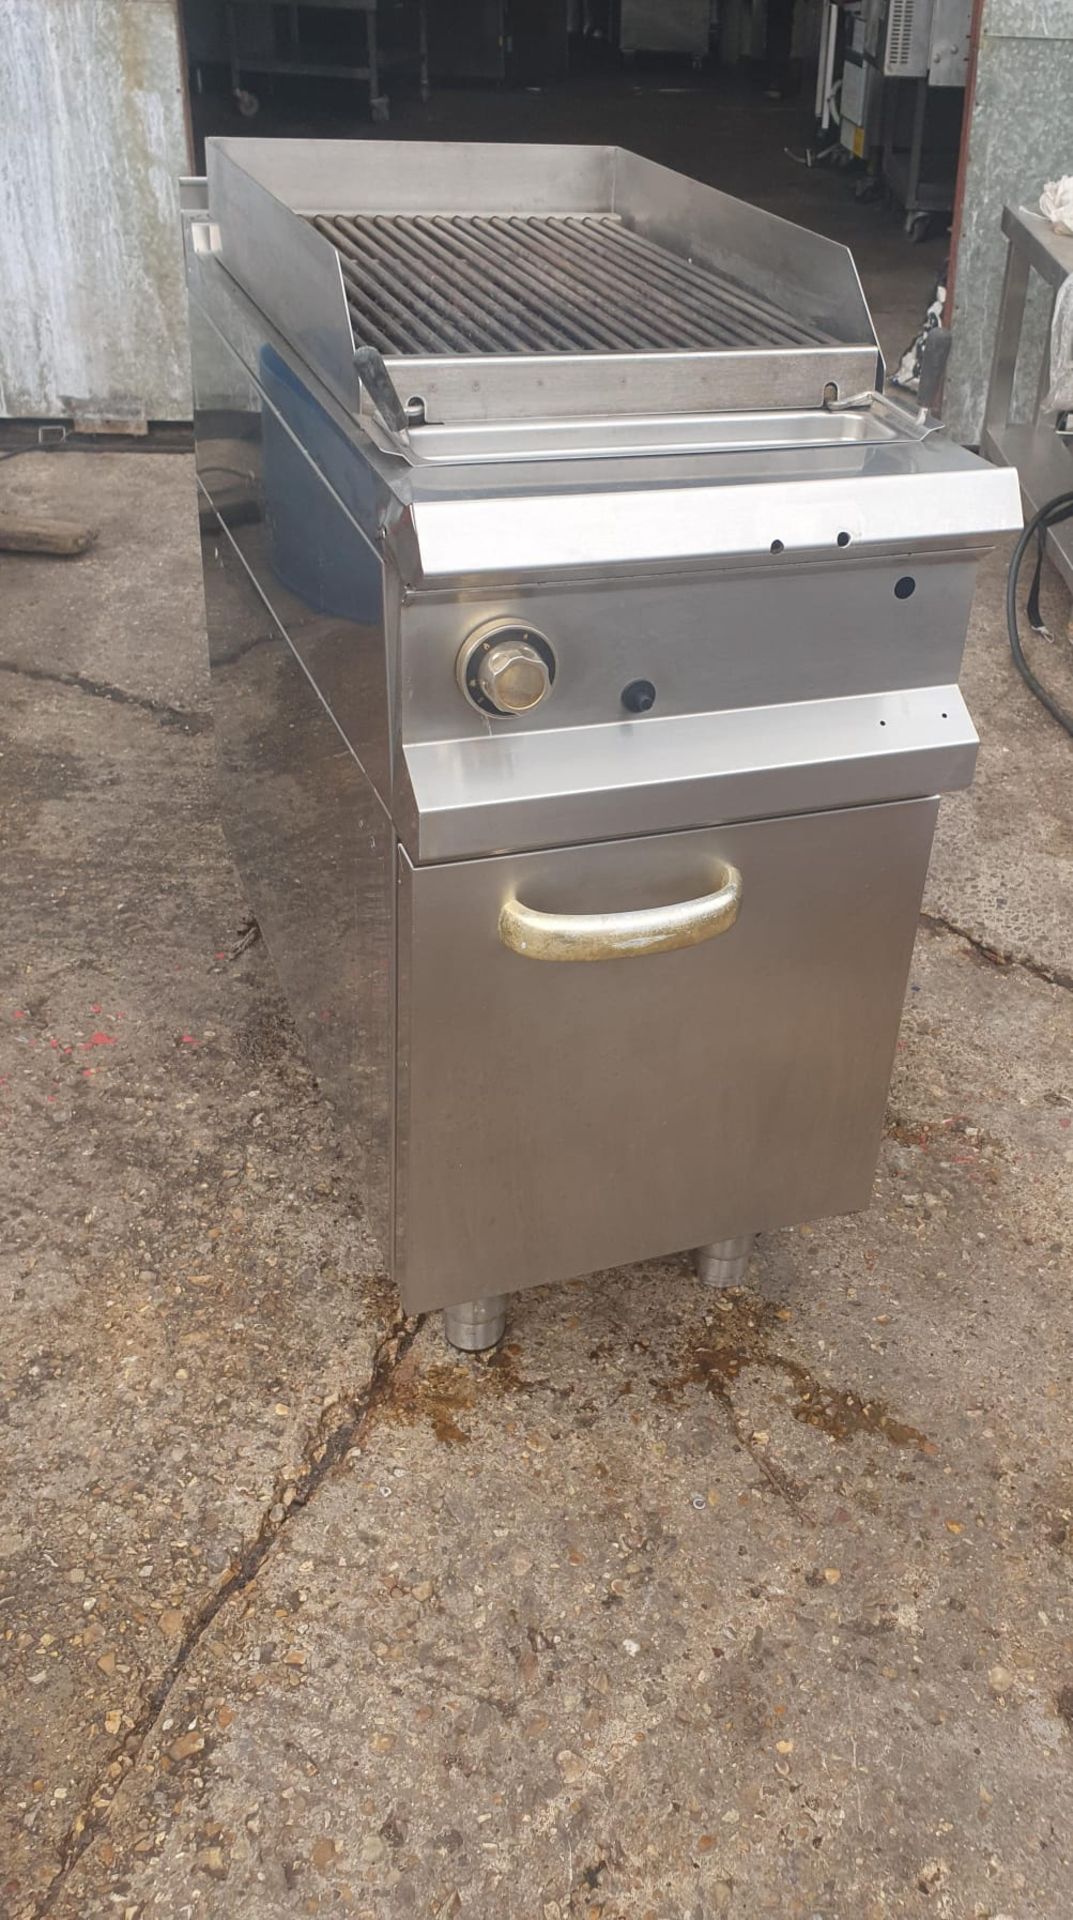 CHARGRILL 450 MM WIDE - FULLY WORKING - NATURAL GAS